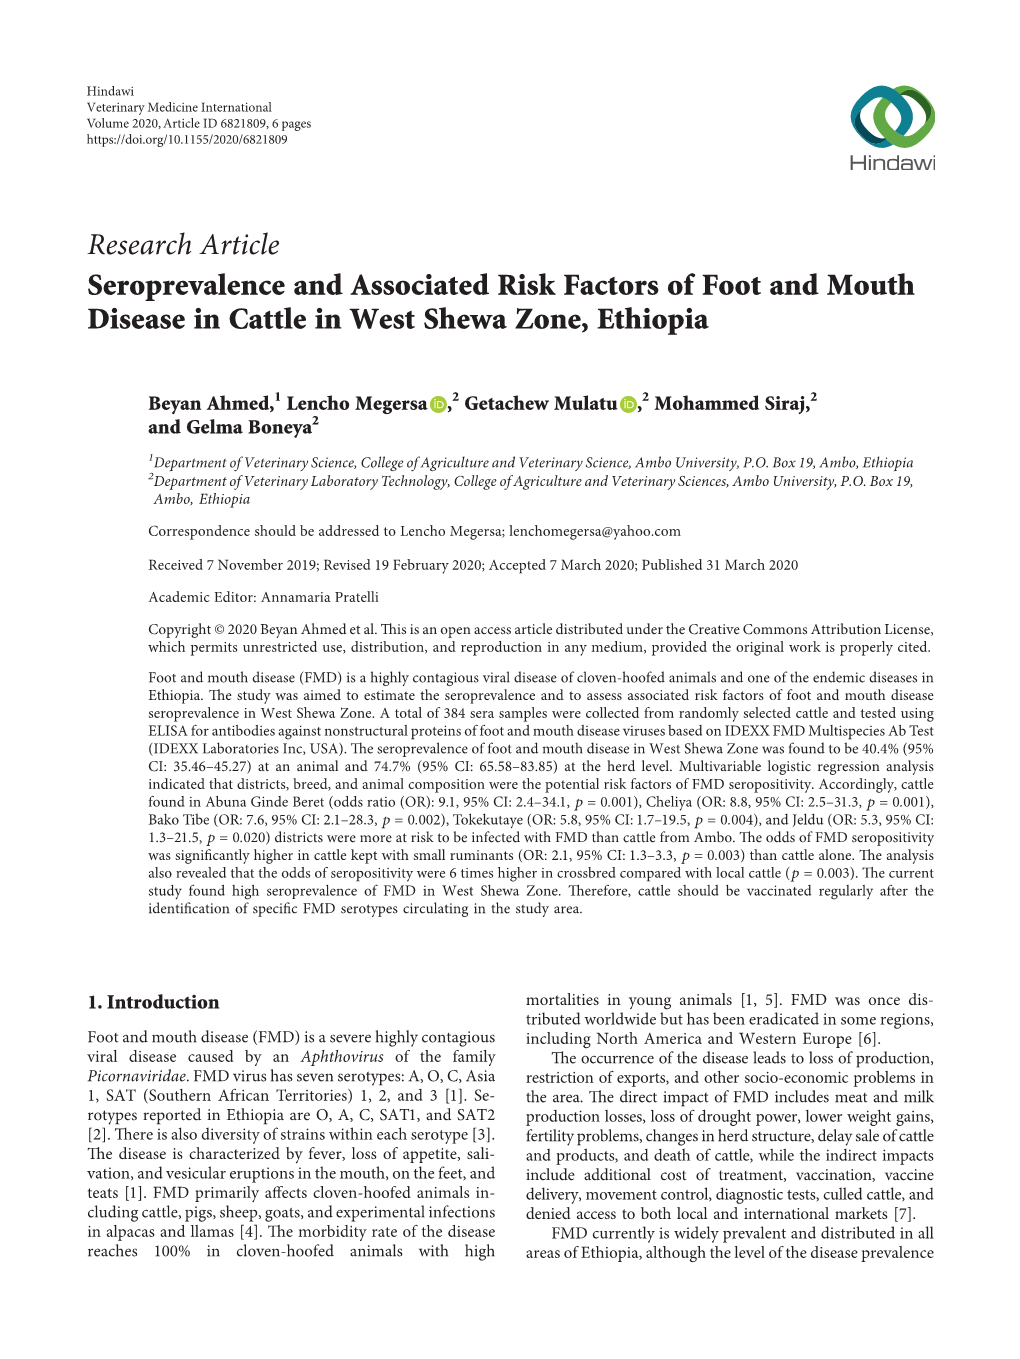 Seroprevalence and Associated Risk Factors of Foot and Mouth Disease in Cattle in West Shewa Zone, Ethiopia